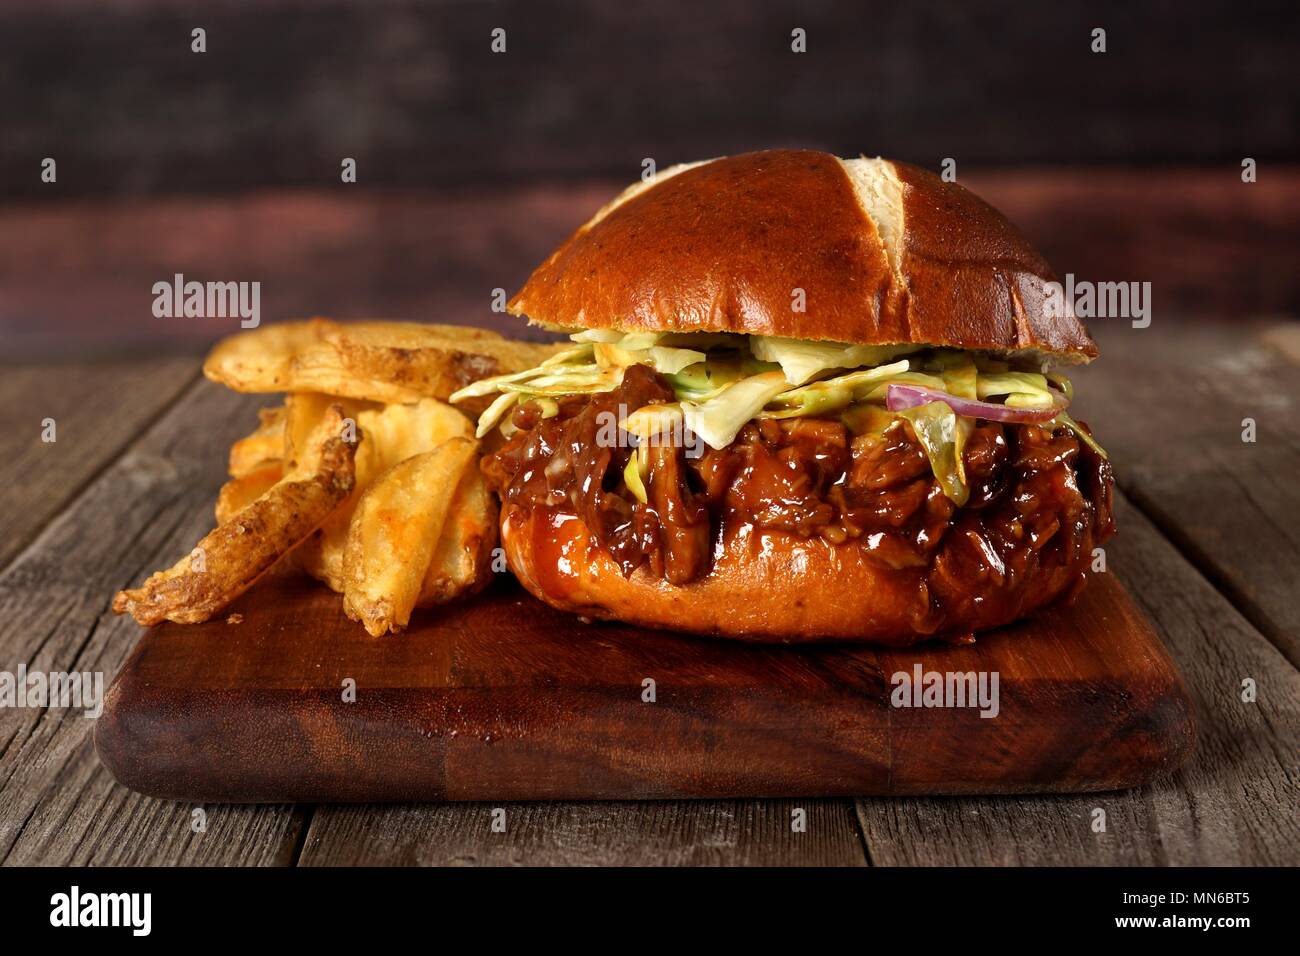 Pulled pork sandwich on pretzel bun with potato wedges on a serving board with wood background Stock Photo